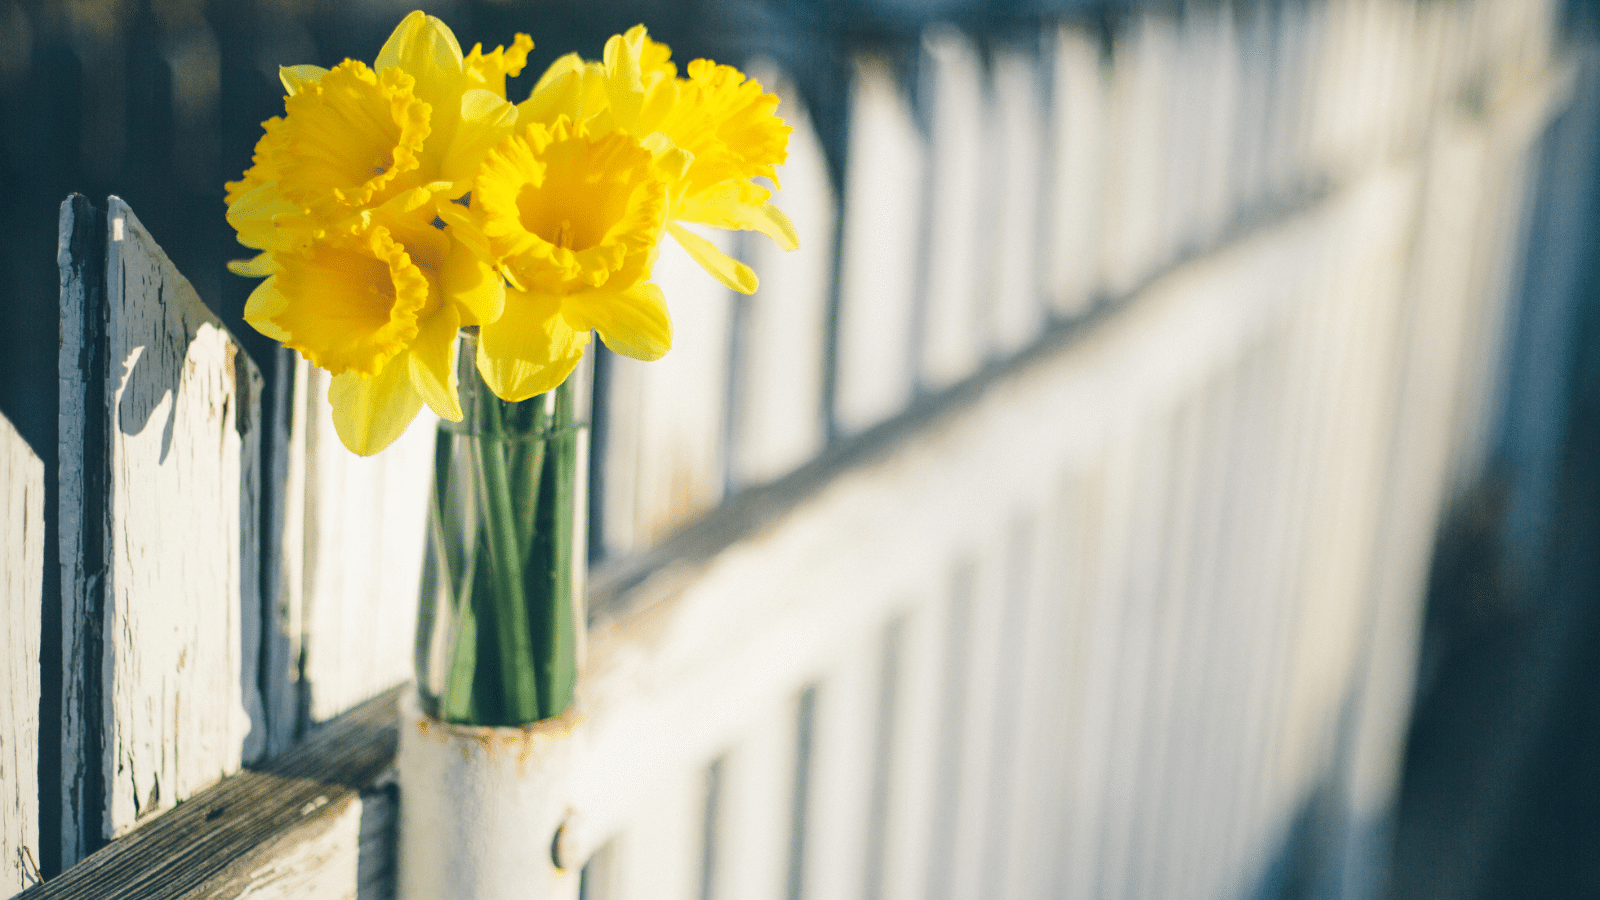 White fence with yellow daffodils